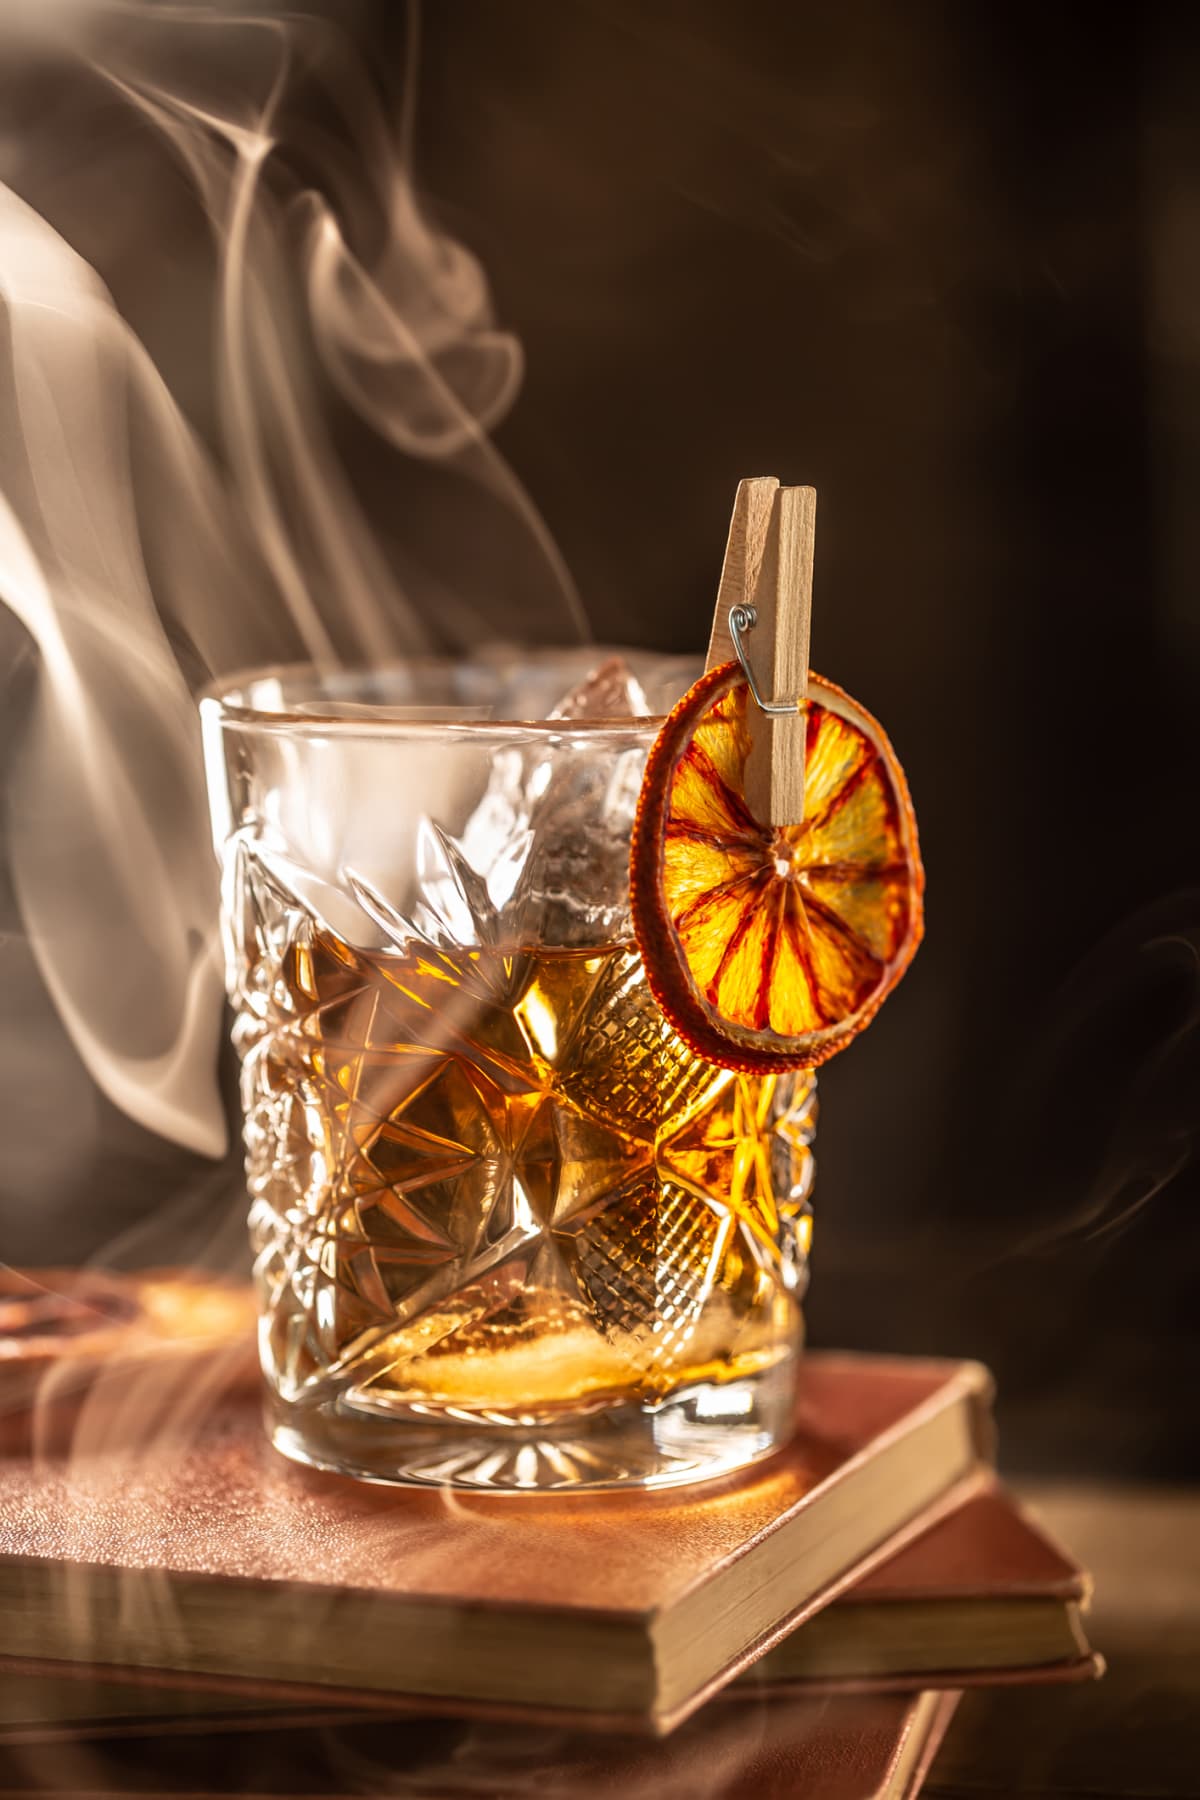 Smoked old fashioned rum cocktail with cubes of ice around on a dark background.